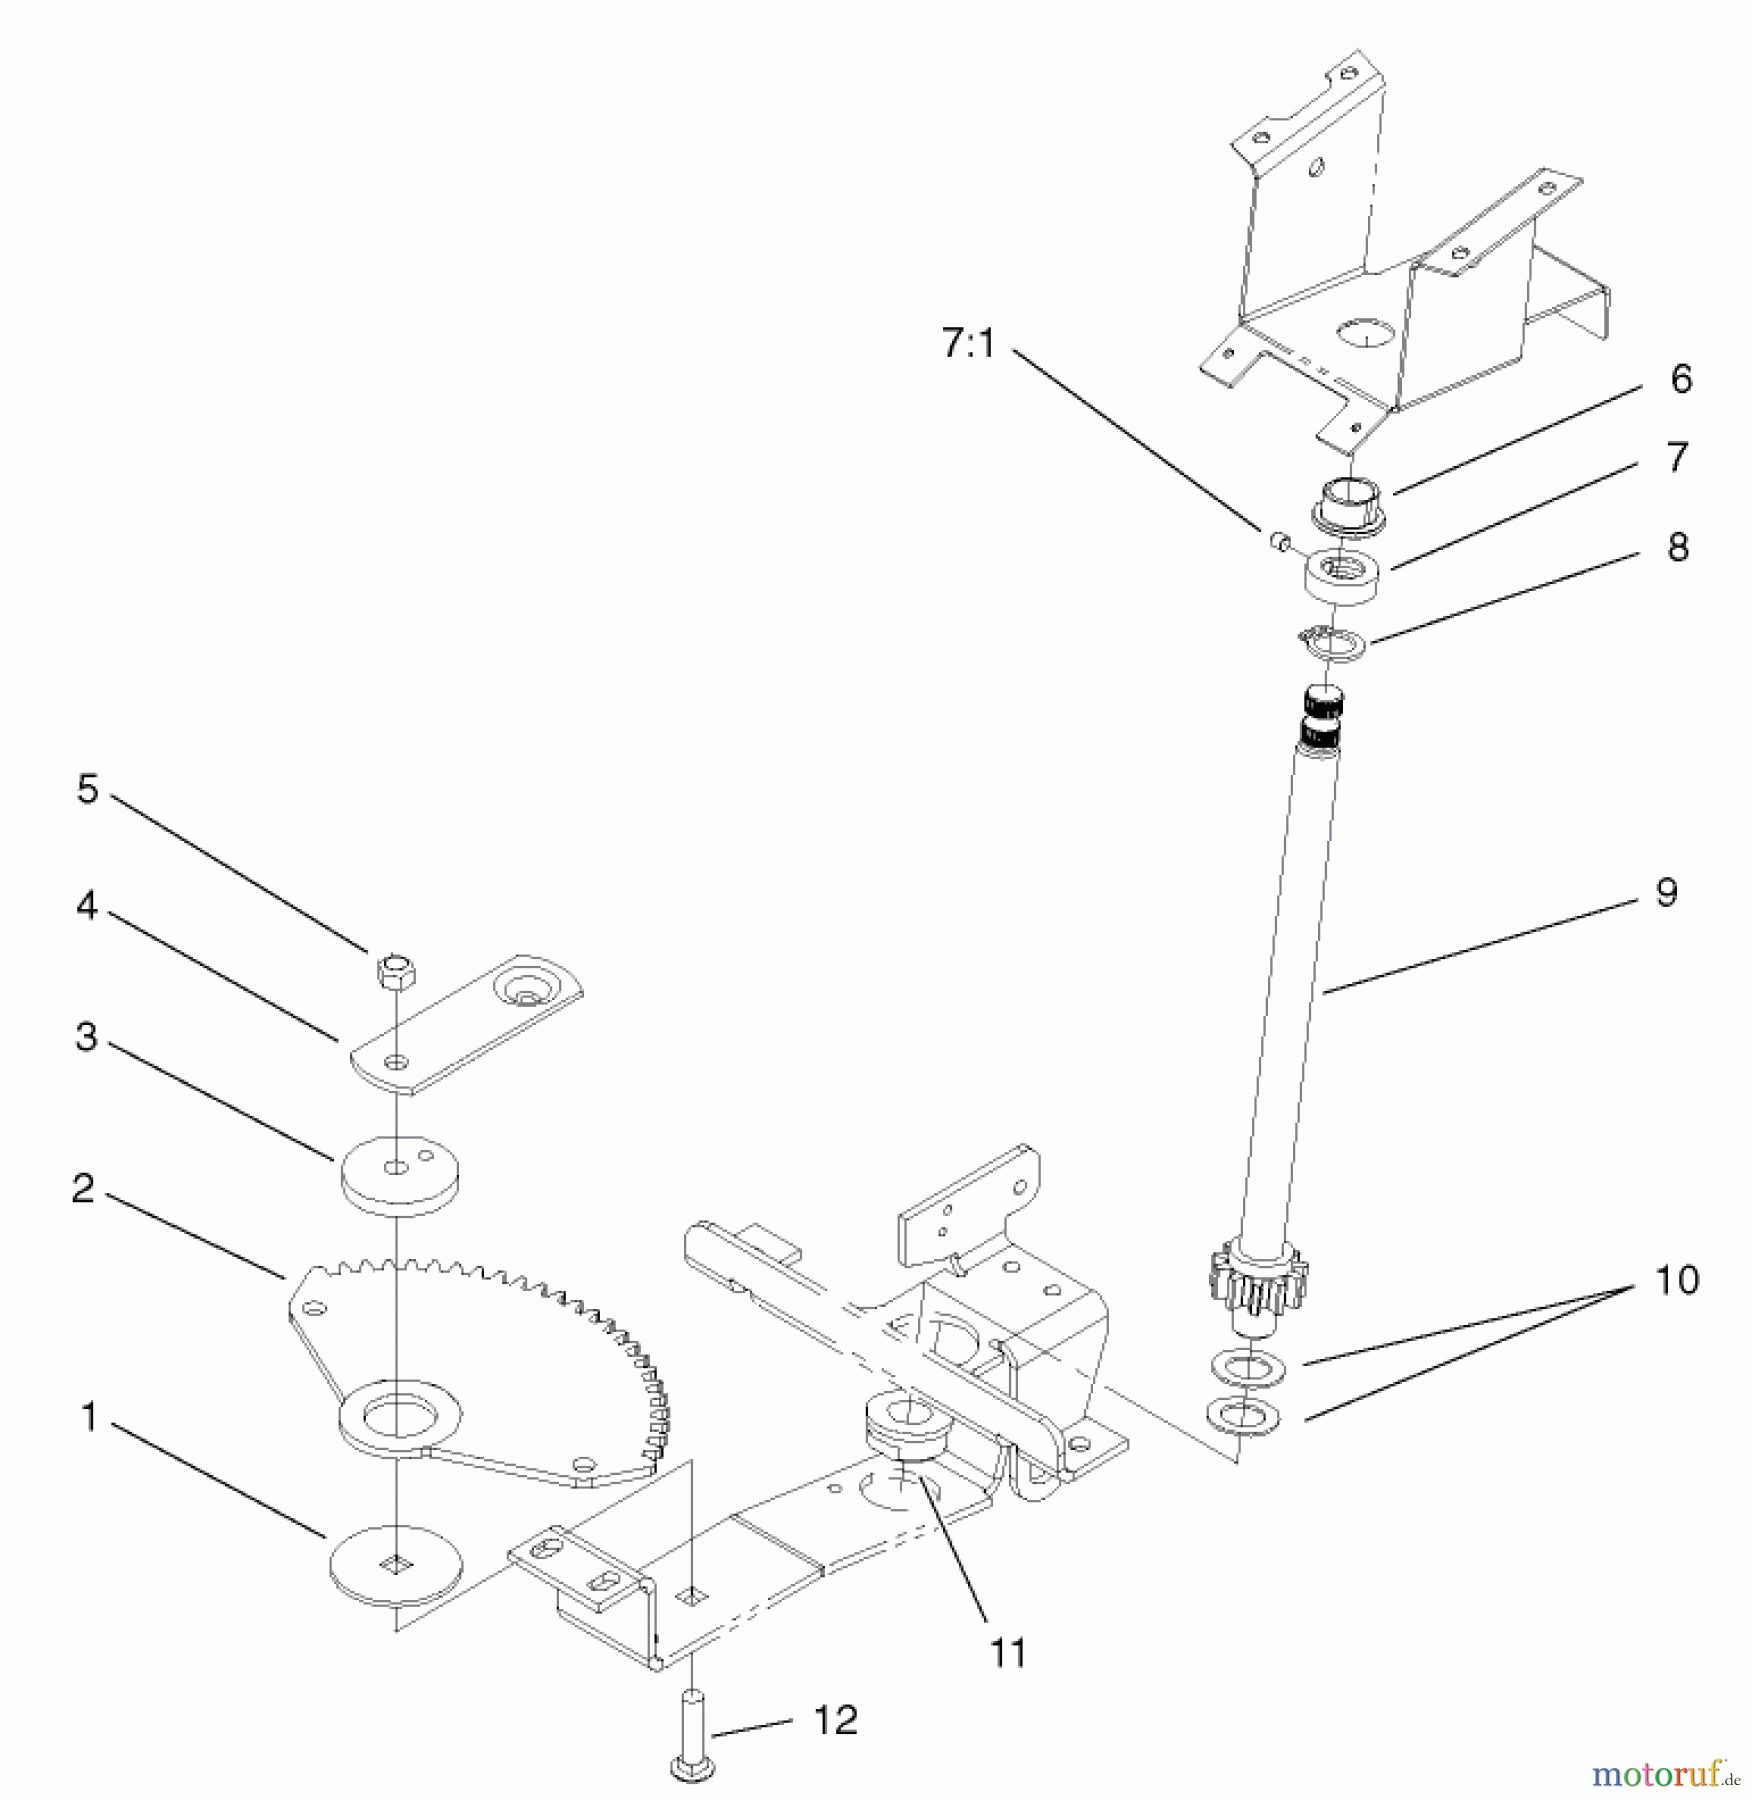  Toro Neu Mowers, Lawn & Garden Tractor Seite 1 72052 (266-H) - Toro 266-H Lawn and Garden Tractor, 2001 (210000001-210999999) LOWER STEERING ASSEMBLY